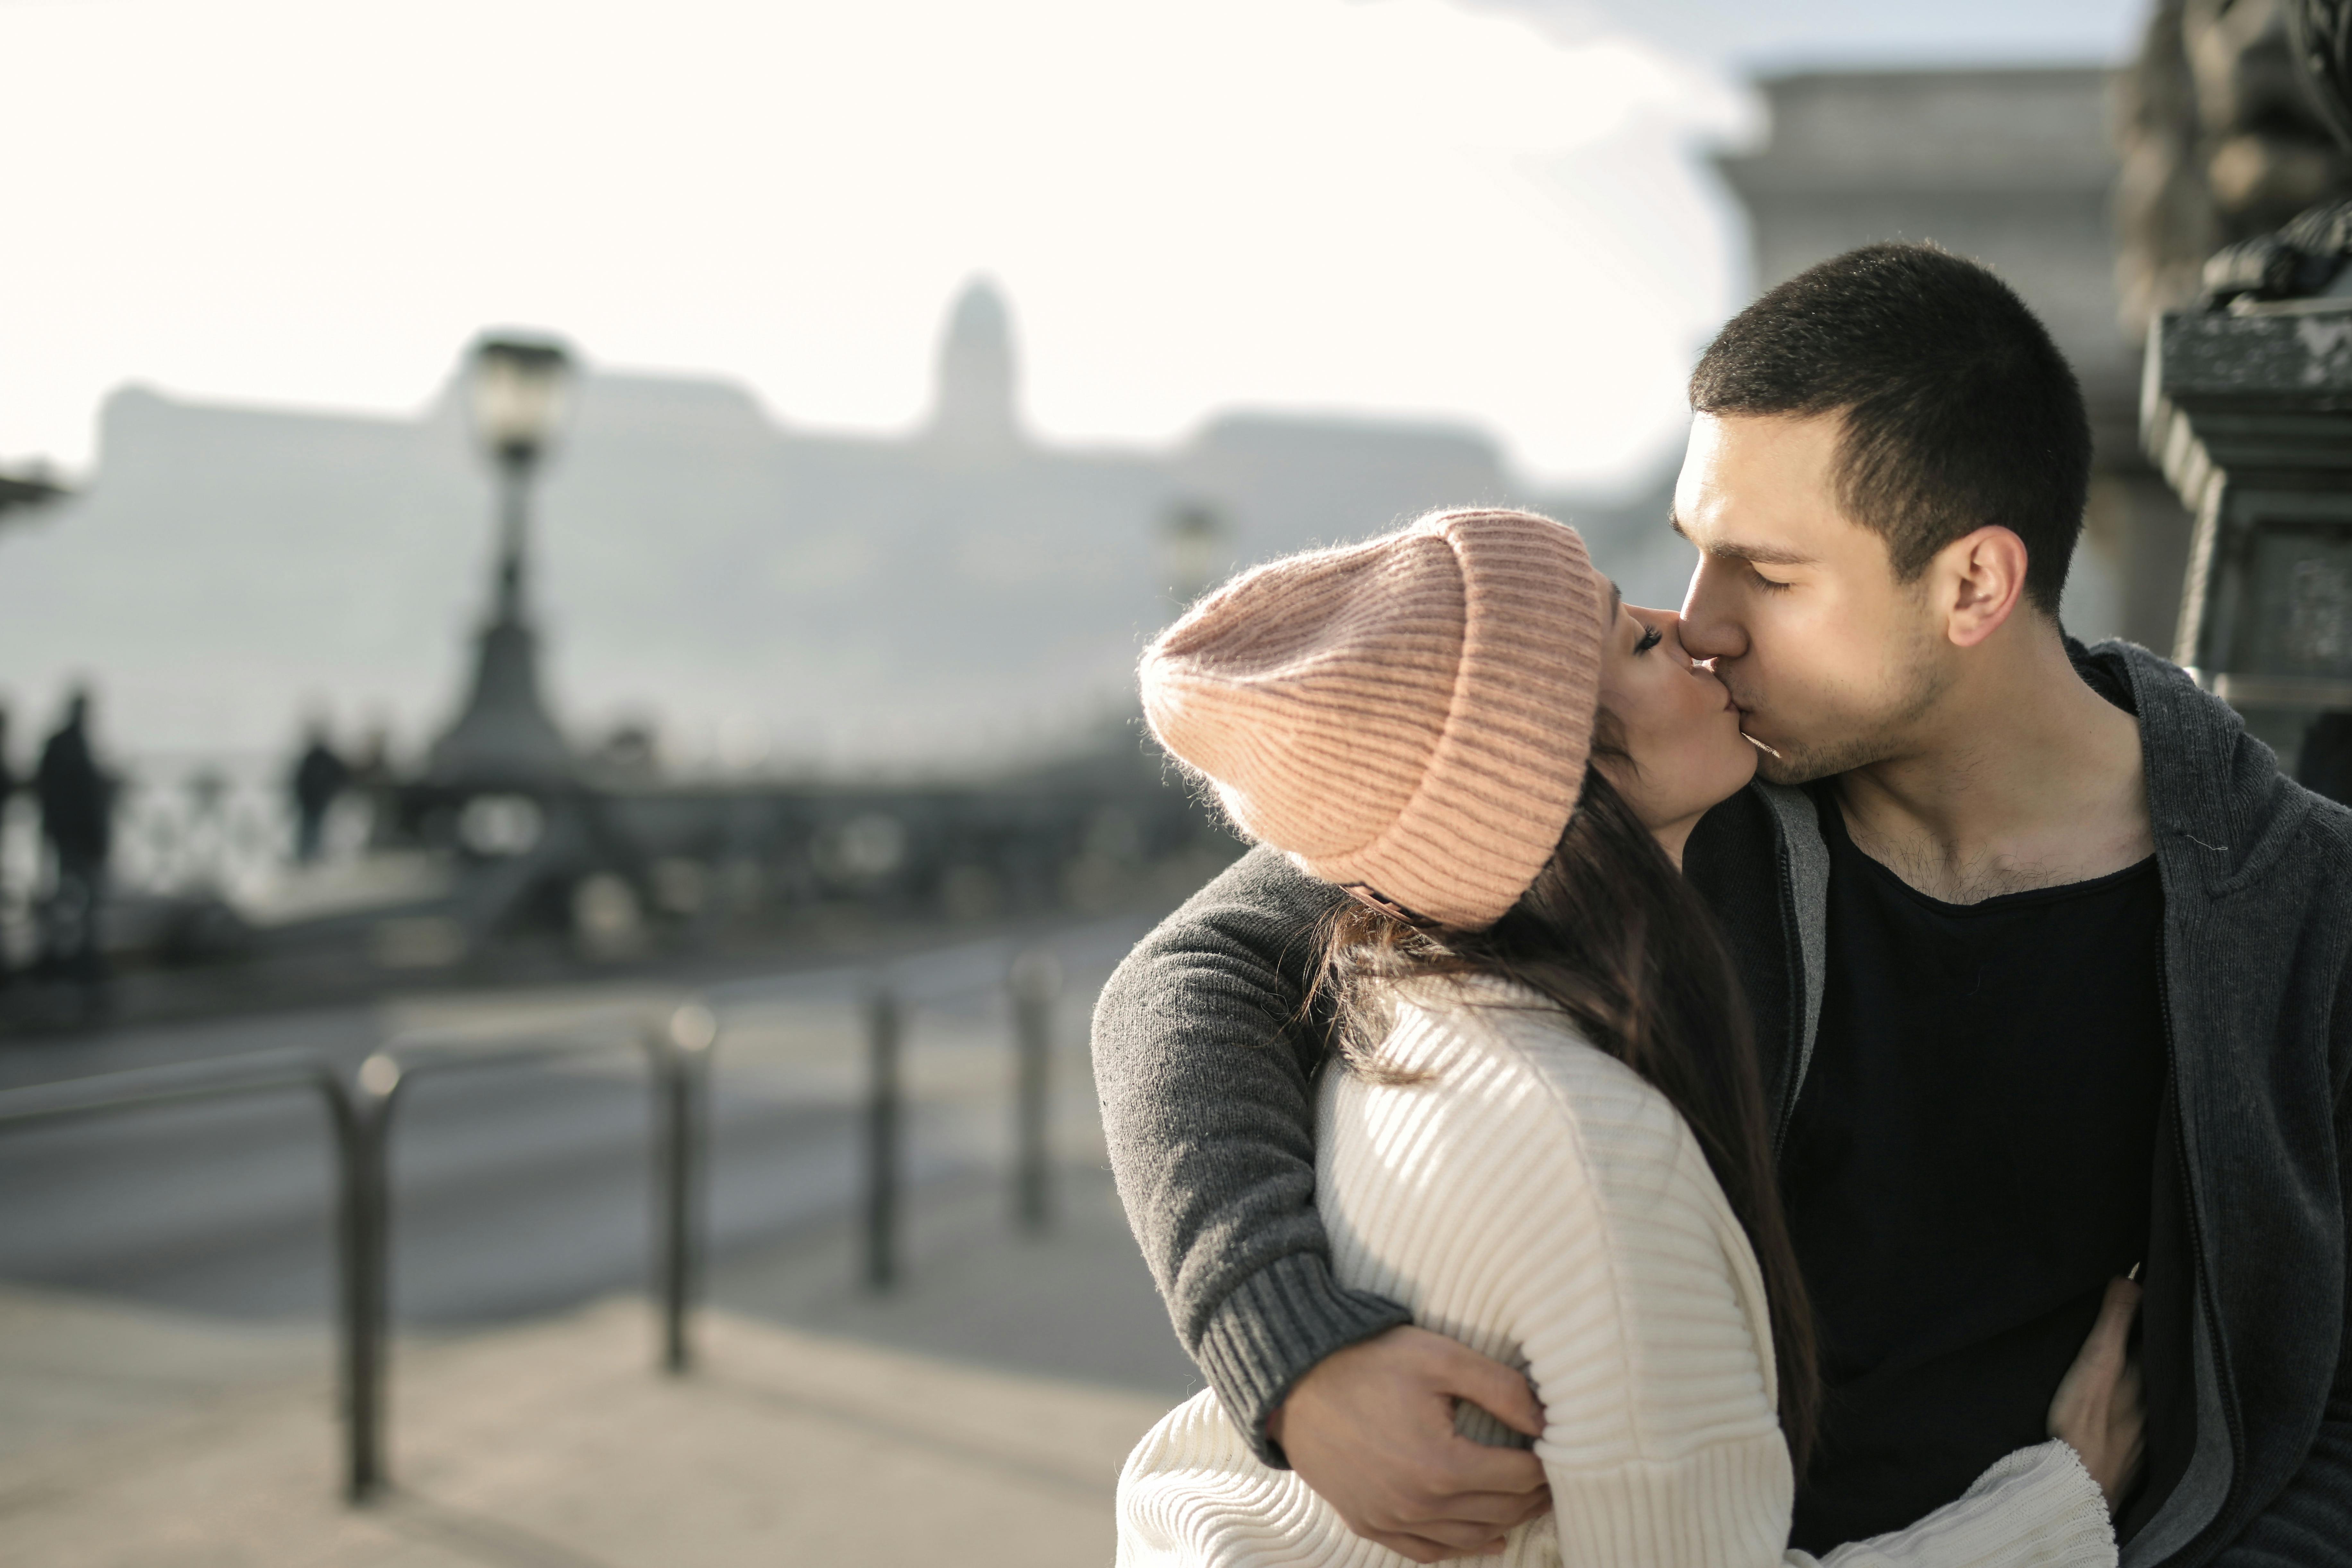 A couple hugging and kissing | Source: Pexels